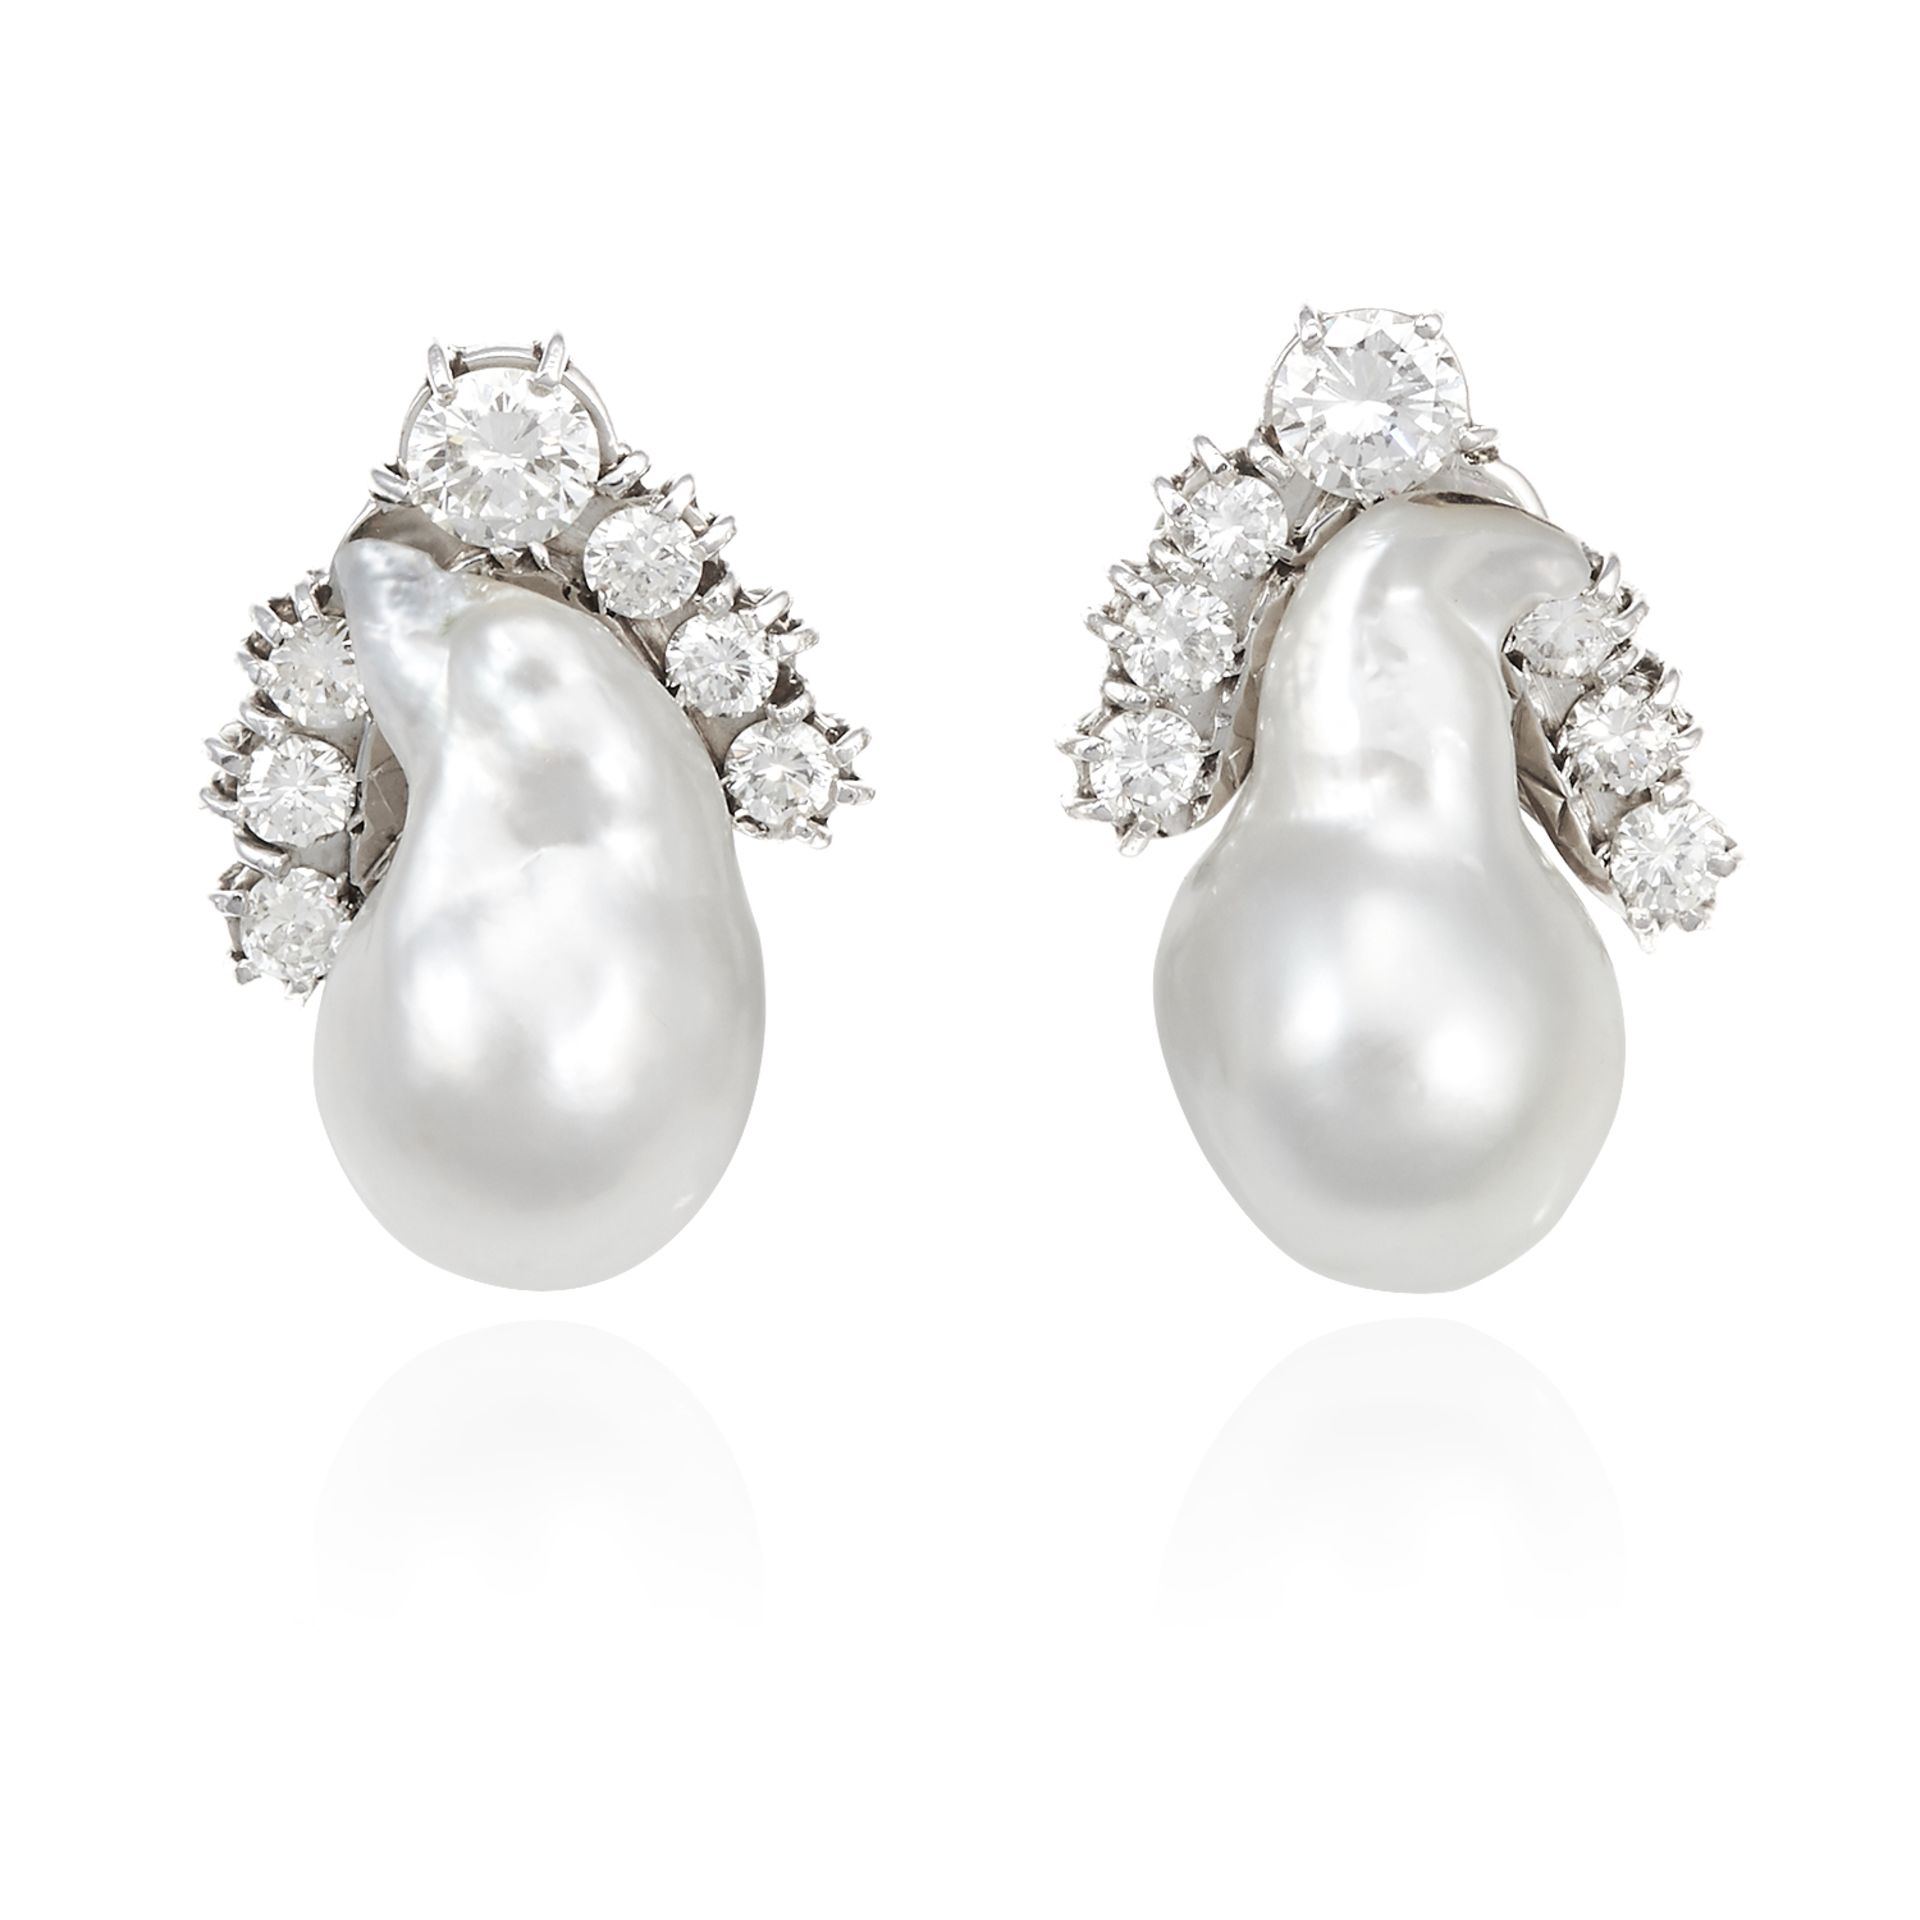 A PAIR OF PEARL AND DIAMOND EARRINGS in white gold, each set with a baroque pearl of 19.5-20.0mm